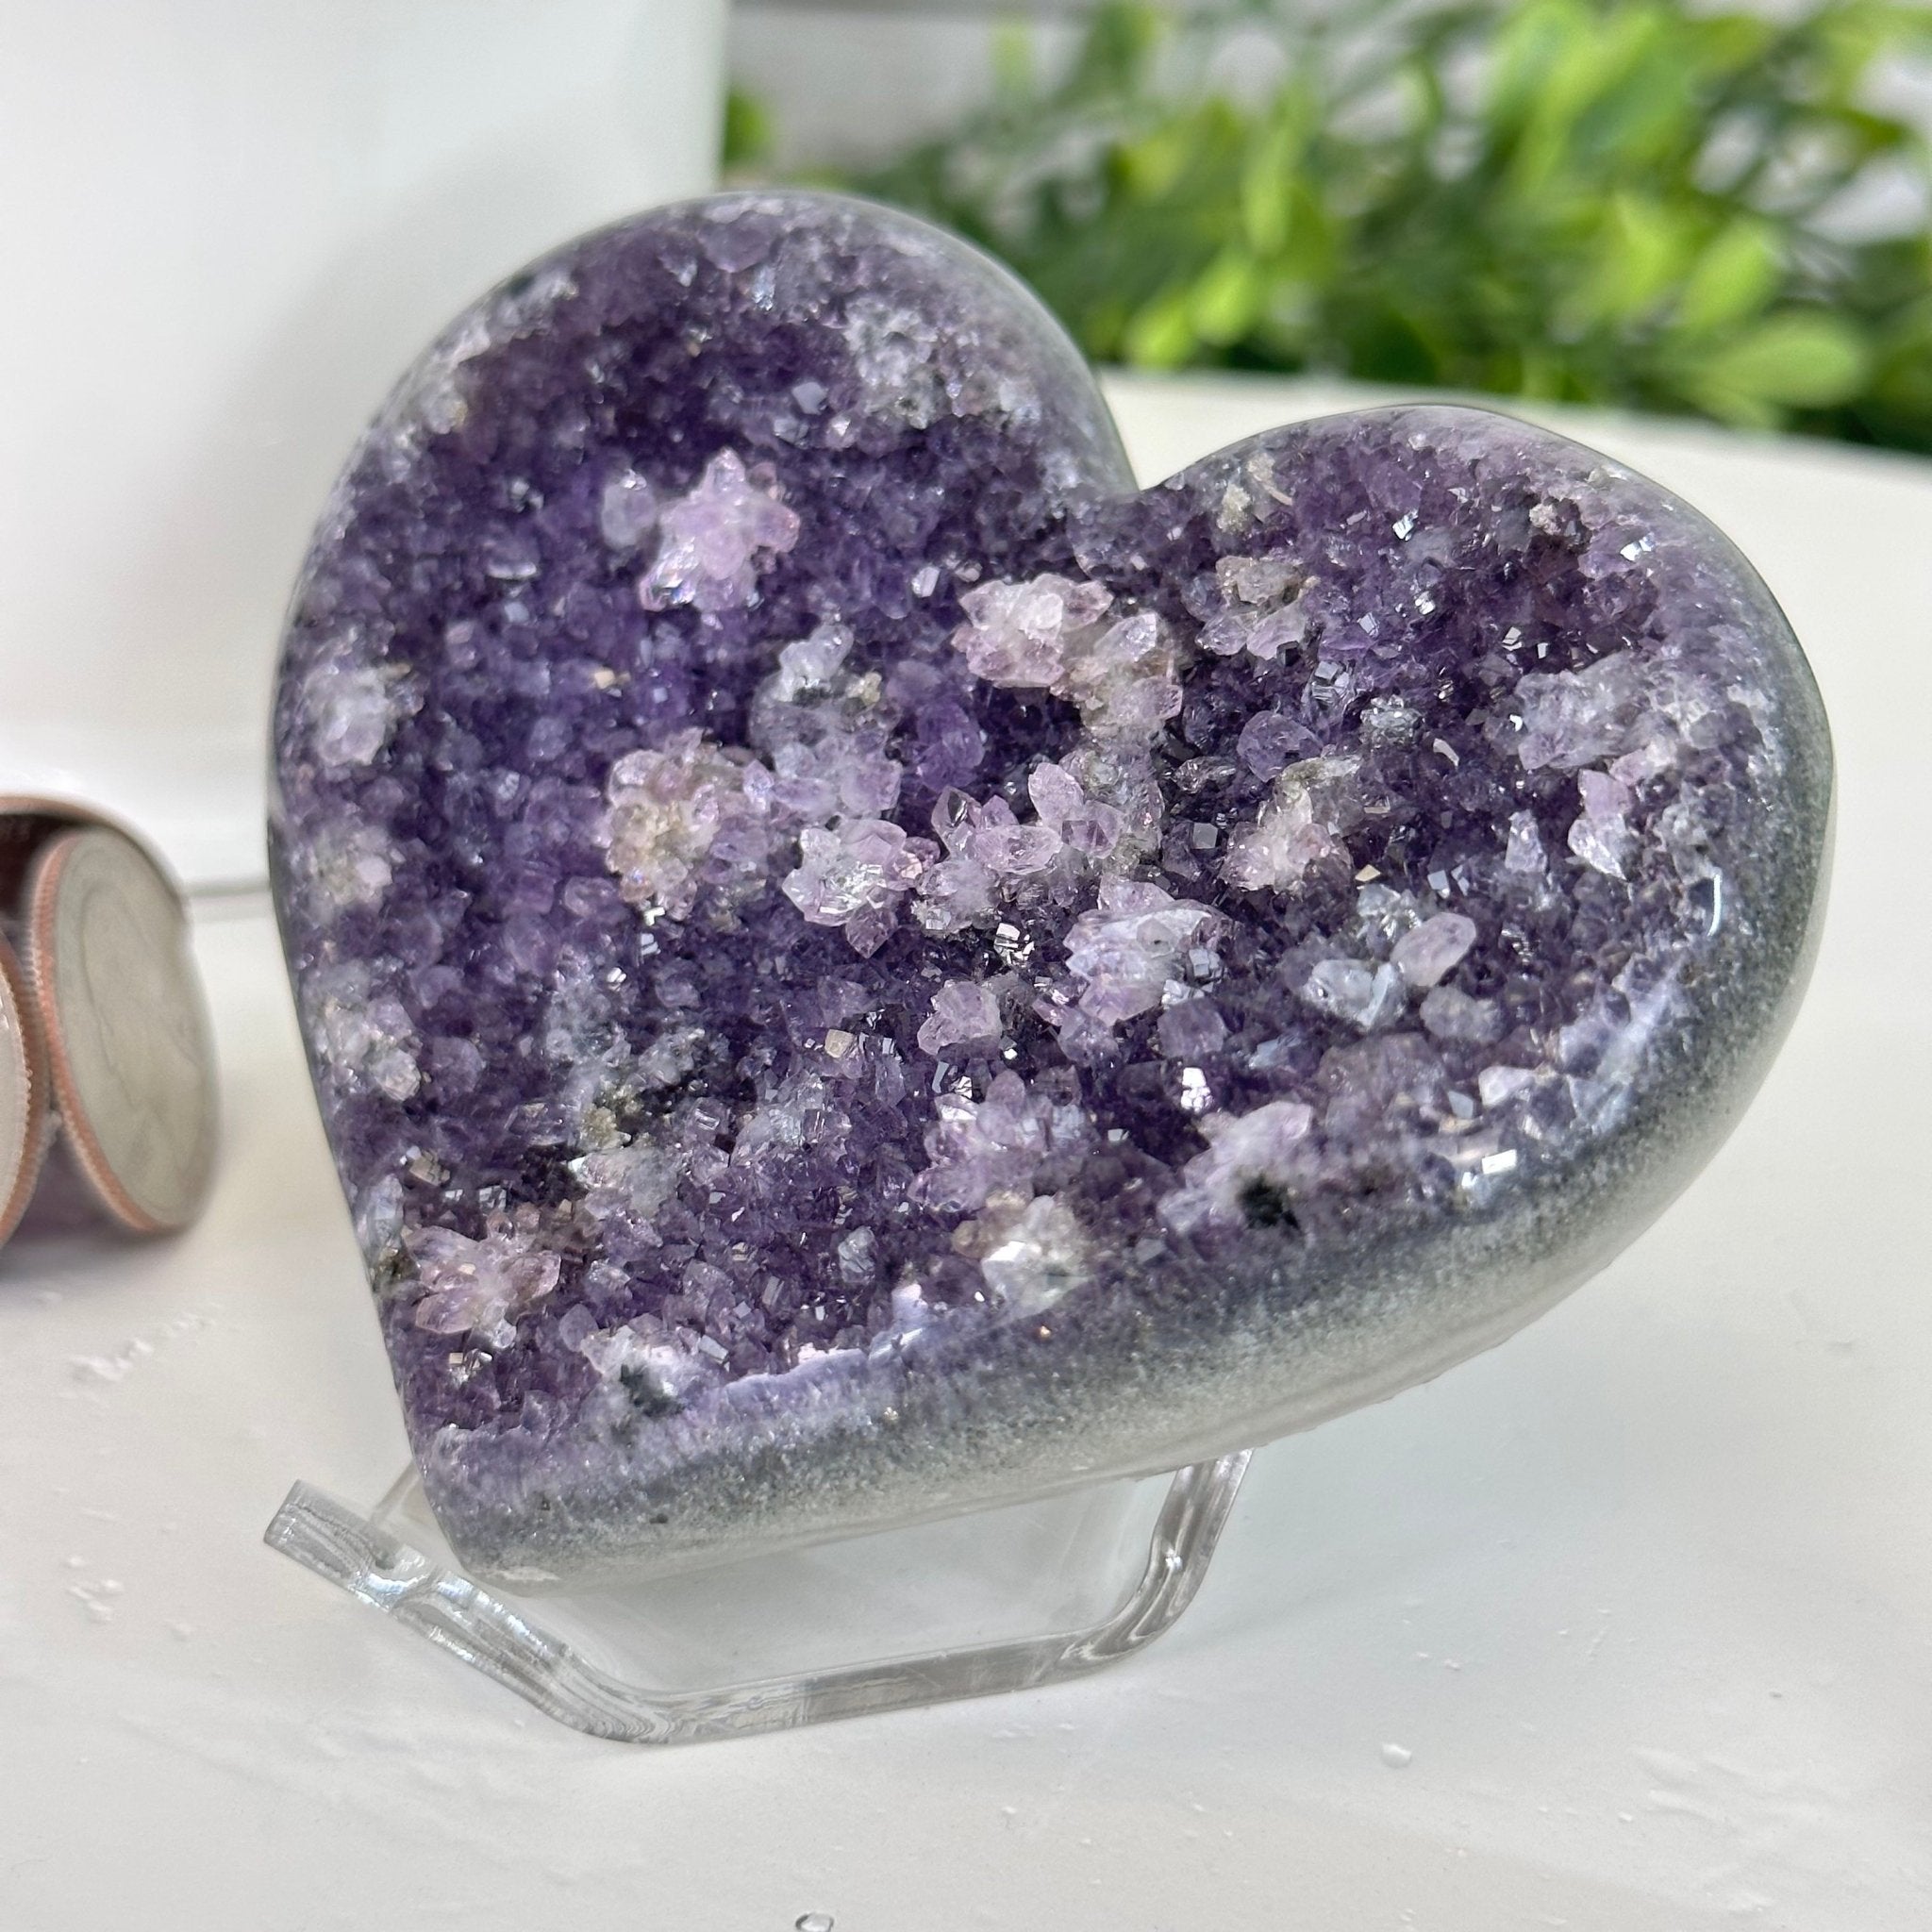 Extra Quality Amethyst Heart Geode on an Acrylic Stand, 0.43 lbs & 2.4" Tall #5462-0085 by Brazil Gems - Brazil GemsBrazil GemsExtra Quality Amethyst Heart Geode on an Acrylic Stand, 0.43 lbs & 2.4" Tall #5462-0085 by Brazil GemsHearts5462-0085